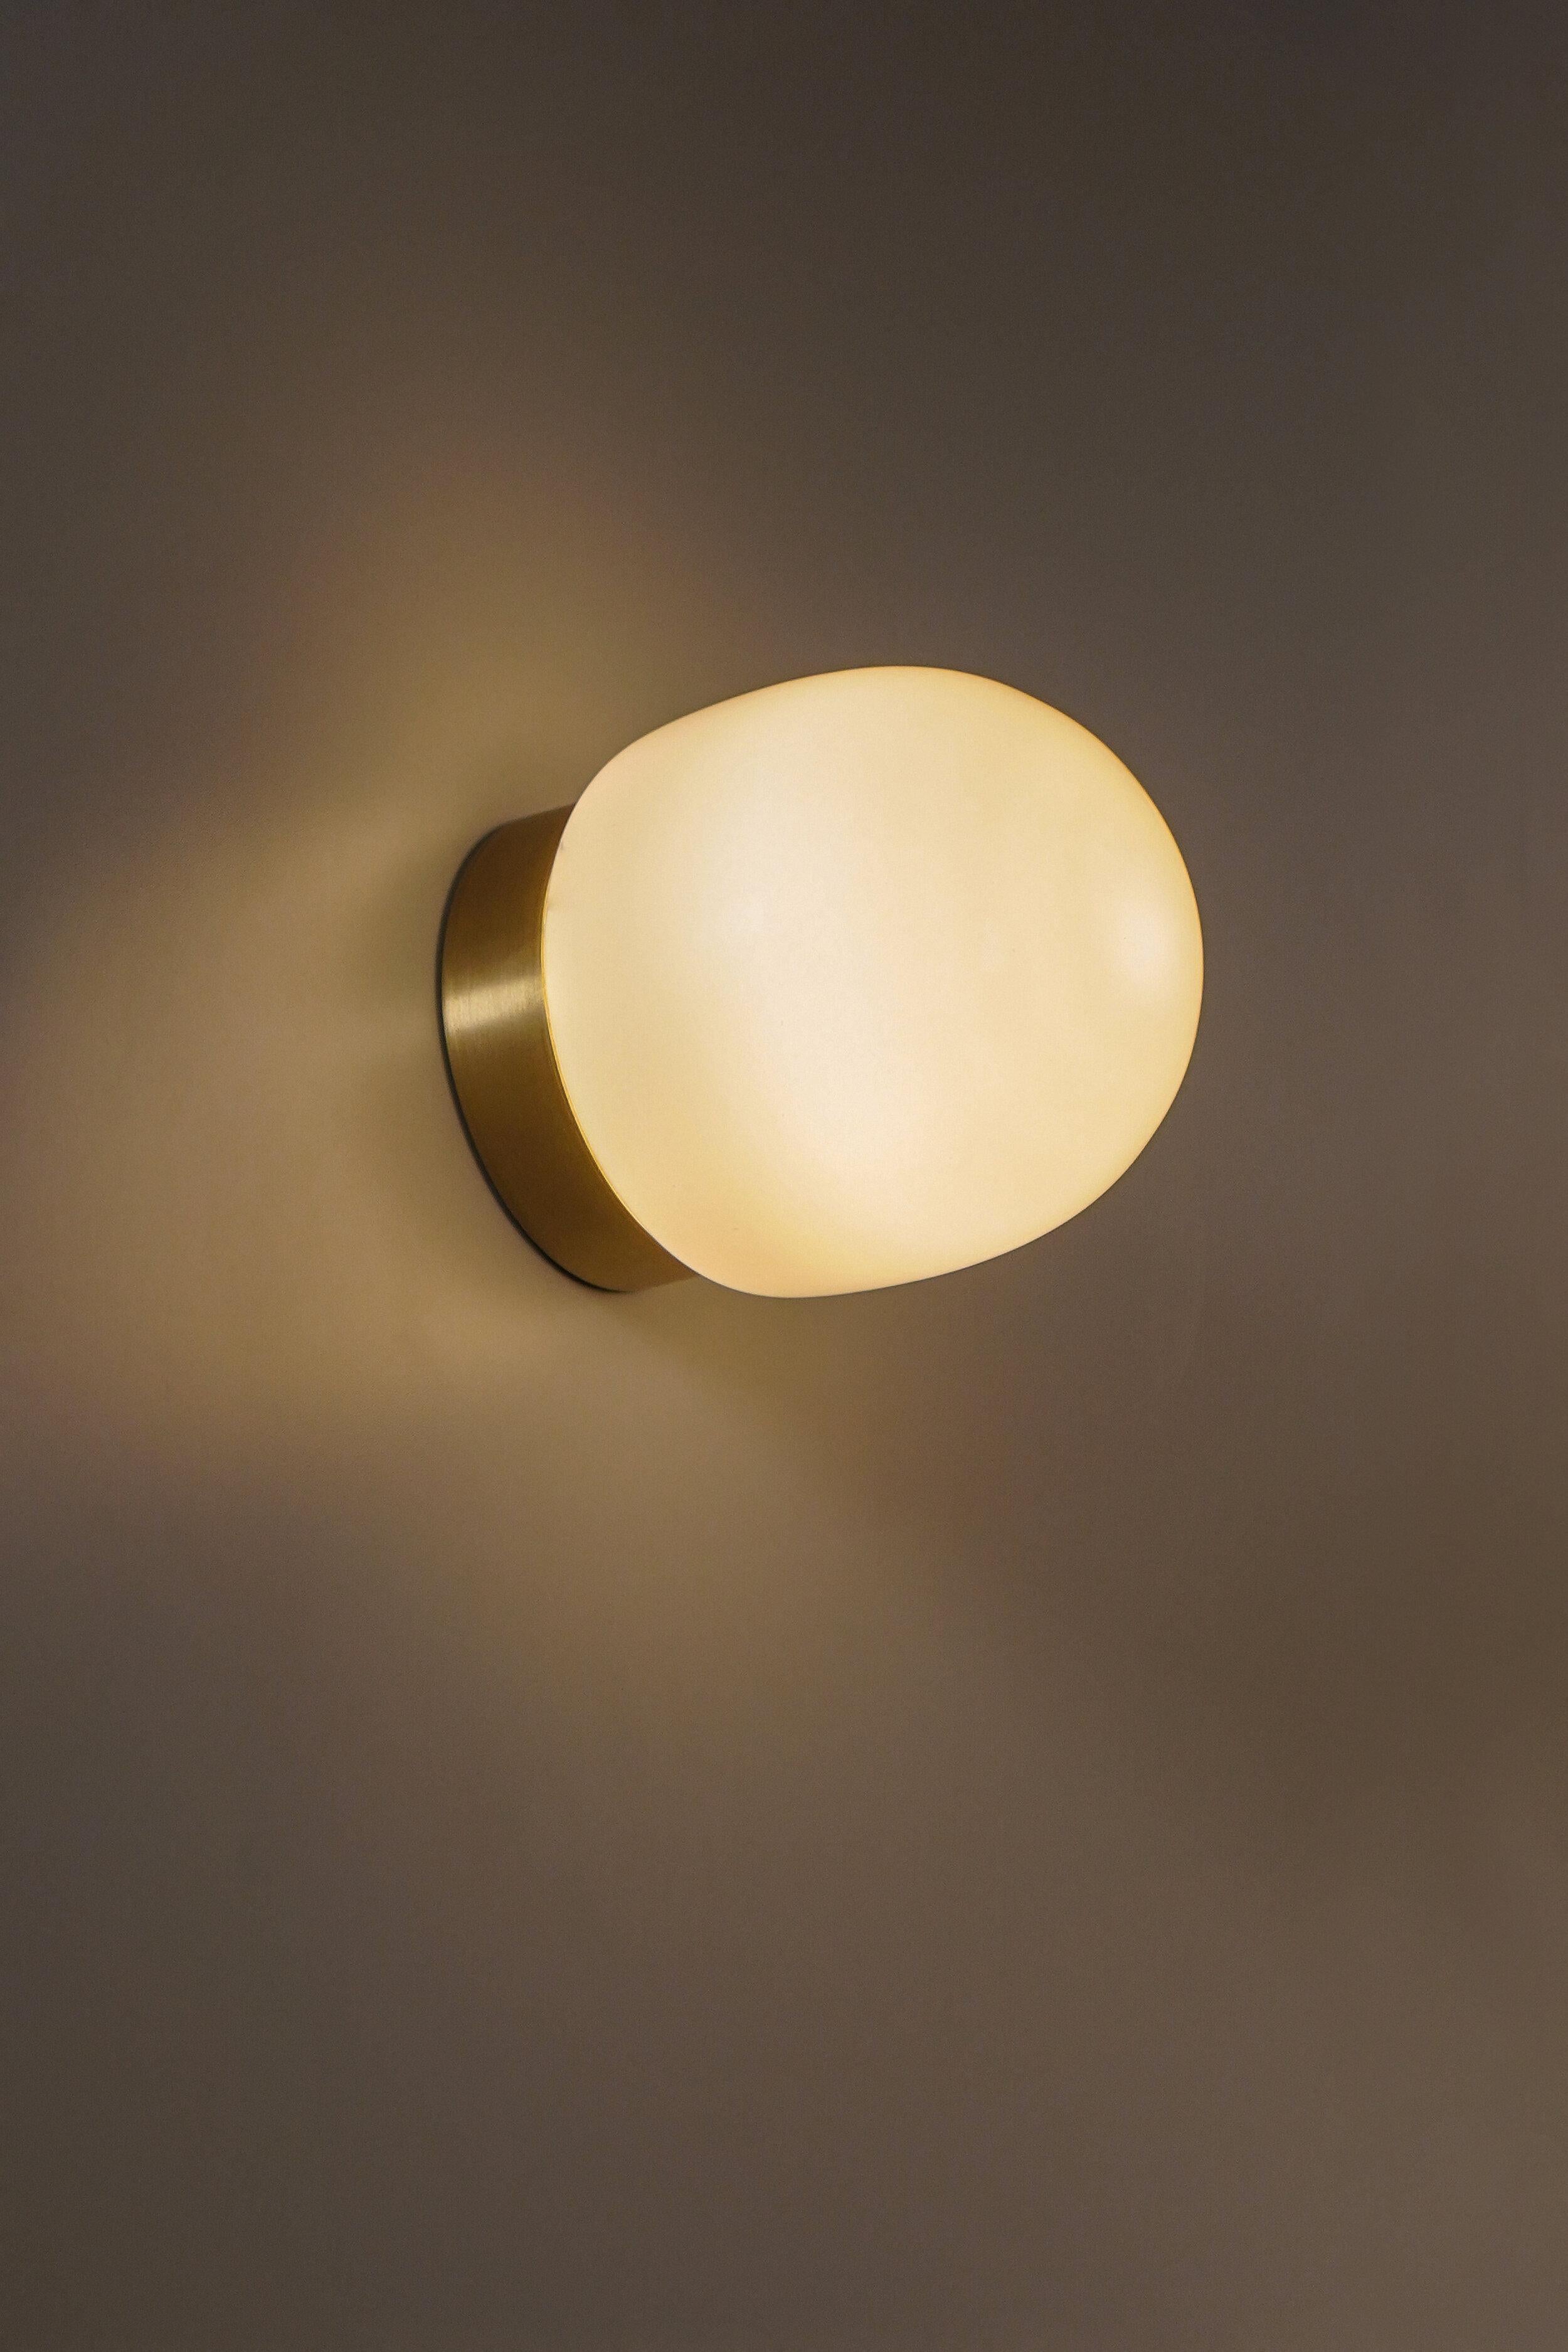 Nuvol simple wall light by Contain.
Dimensions: D 10 x H 11 cm 
Materials: brass structure and opal glass.
Available in different finishes. 

All our lamps can be wired according to each country. If sold to the USA it will be wired for the USA